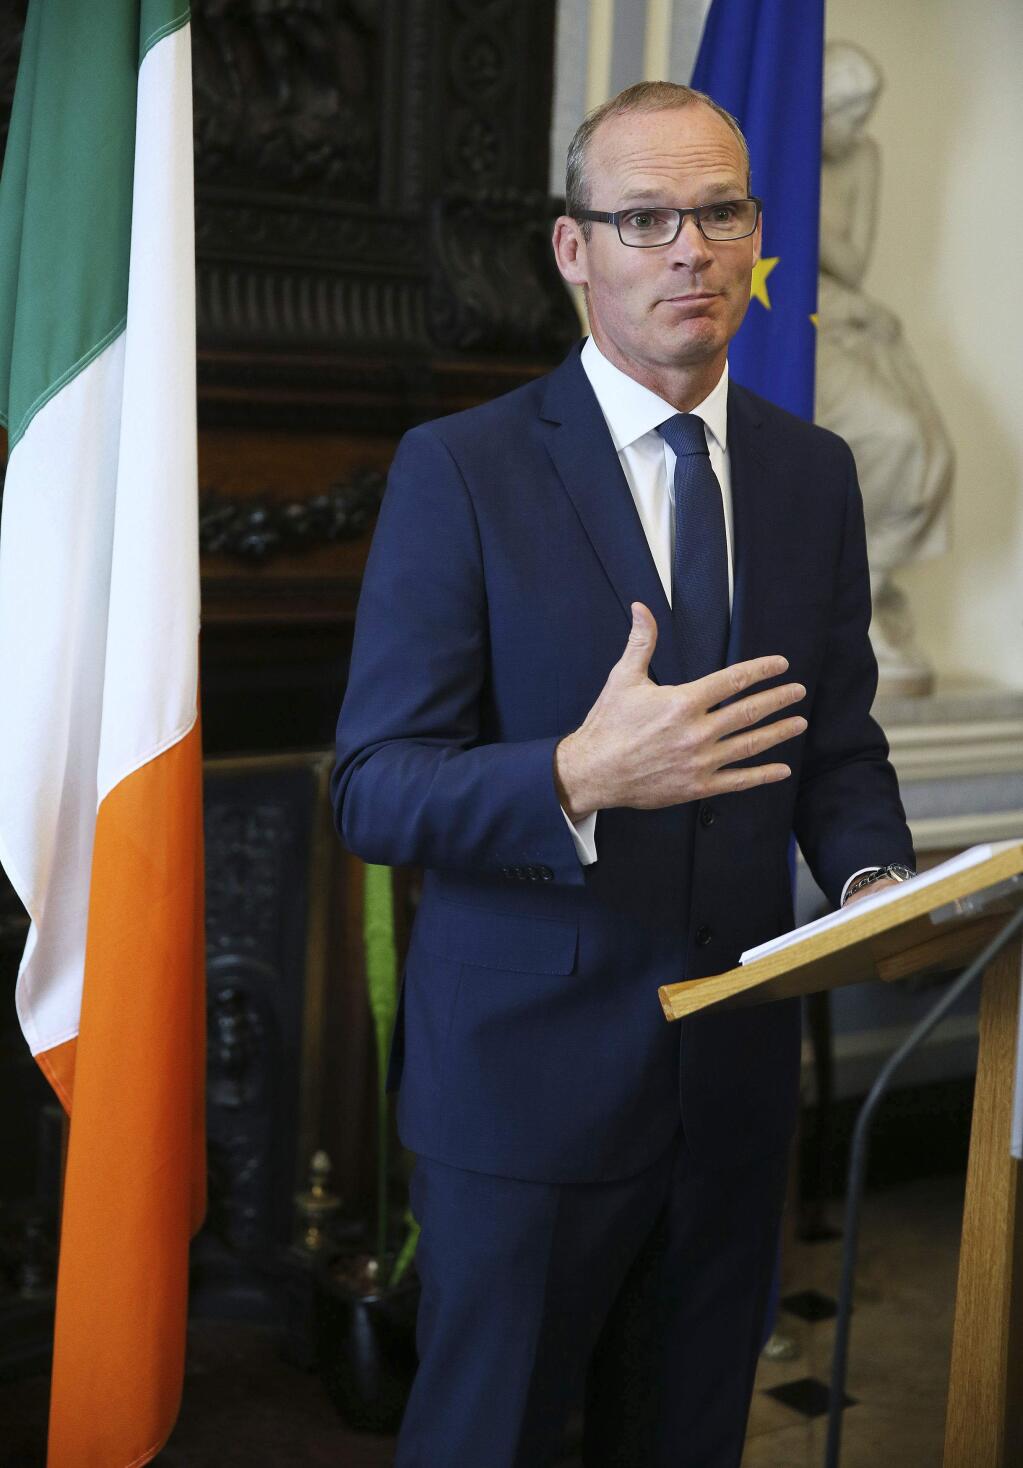 Ireland's Foreign Affairs Minister, Simon Coveney, speaks to the media, at Iveagh House in Dublin, in response to the UK Government's Brexit proposals, Wednesday Aug. 16, 2017. Britain said there must be no border posts or electronic checks between Northern Ireland and the Irish republic after Brexit, and it committed itself to maintaining the longstanding, border-free Common Travel Area covering the U.K. and Ireland. (Brian Lawless/PA via AP)